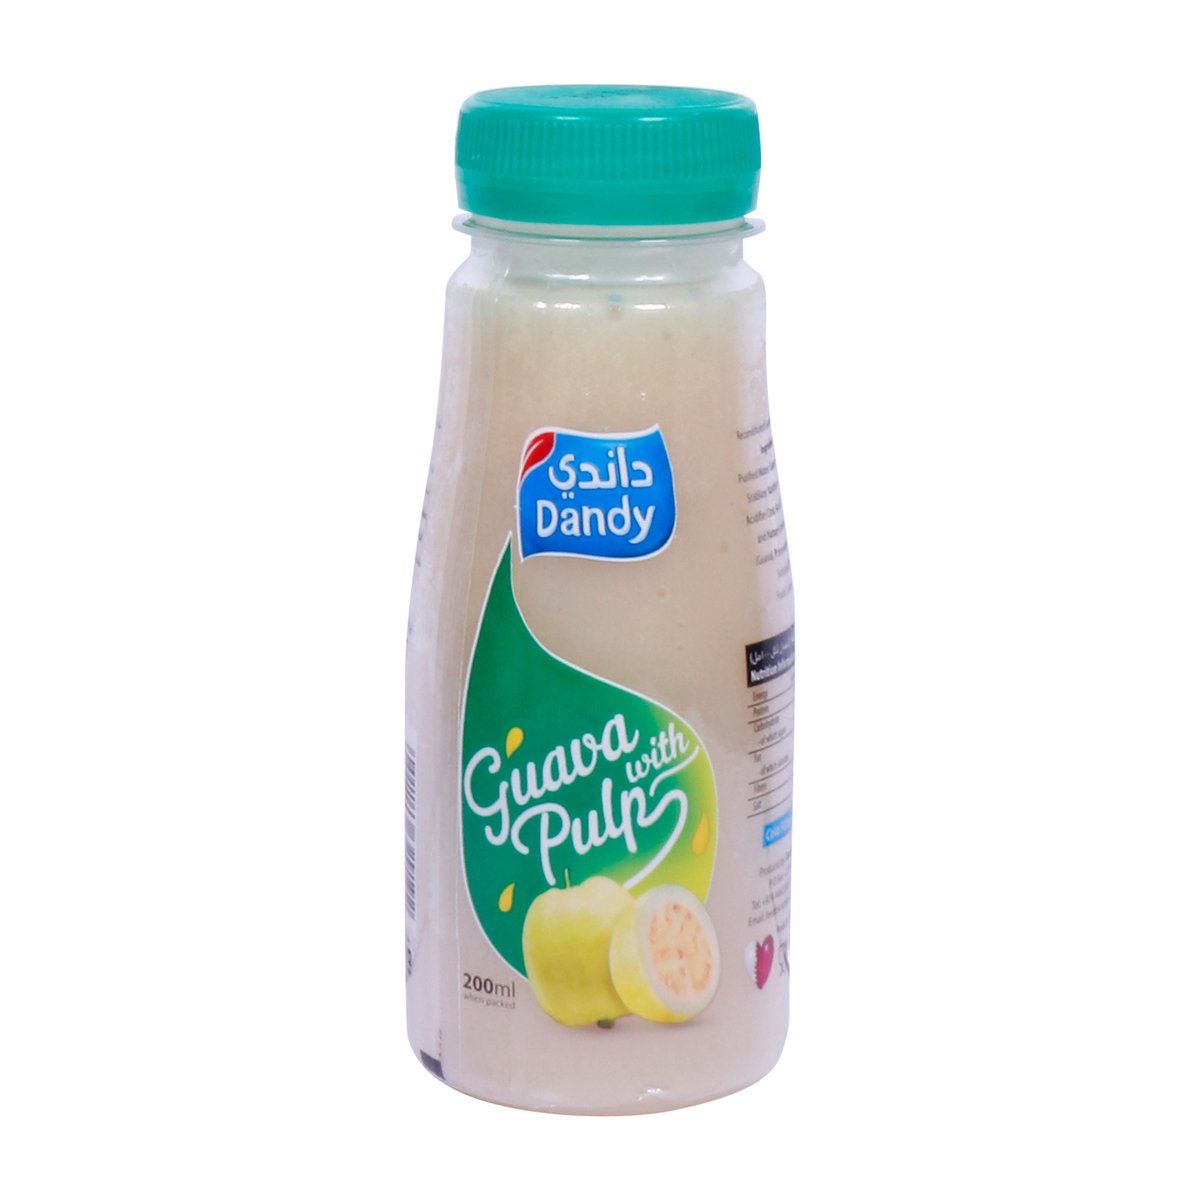 Dandy Guava Juice with Pulp 200ml